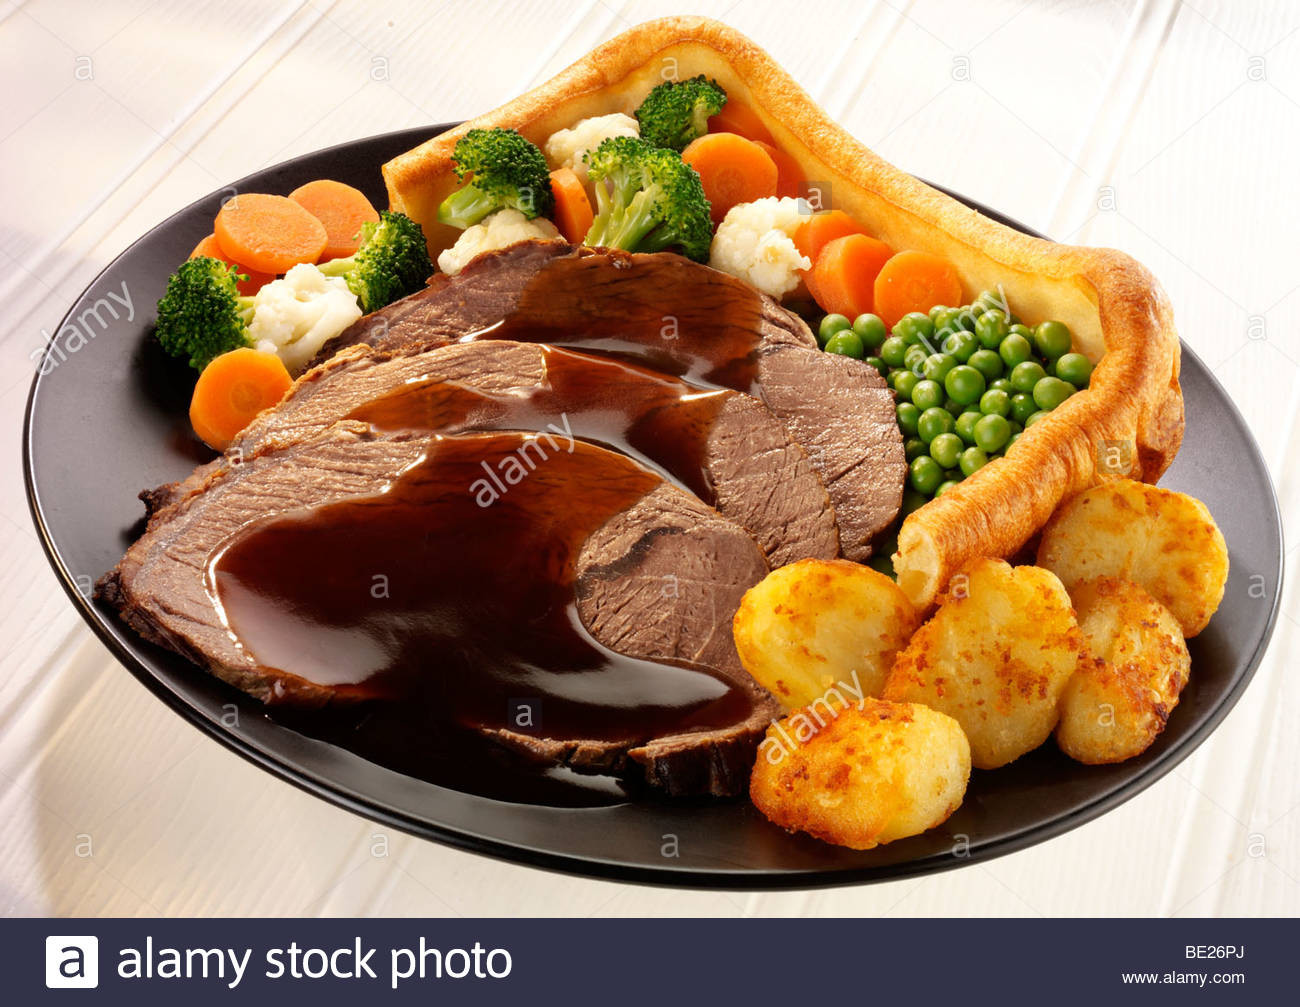 Roast Beef Dinner
 TRADITIONAL ROAST BEEF DINNER WITH YORKSHIRE PUDDING Stock